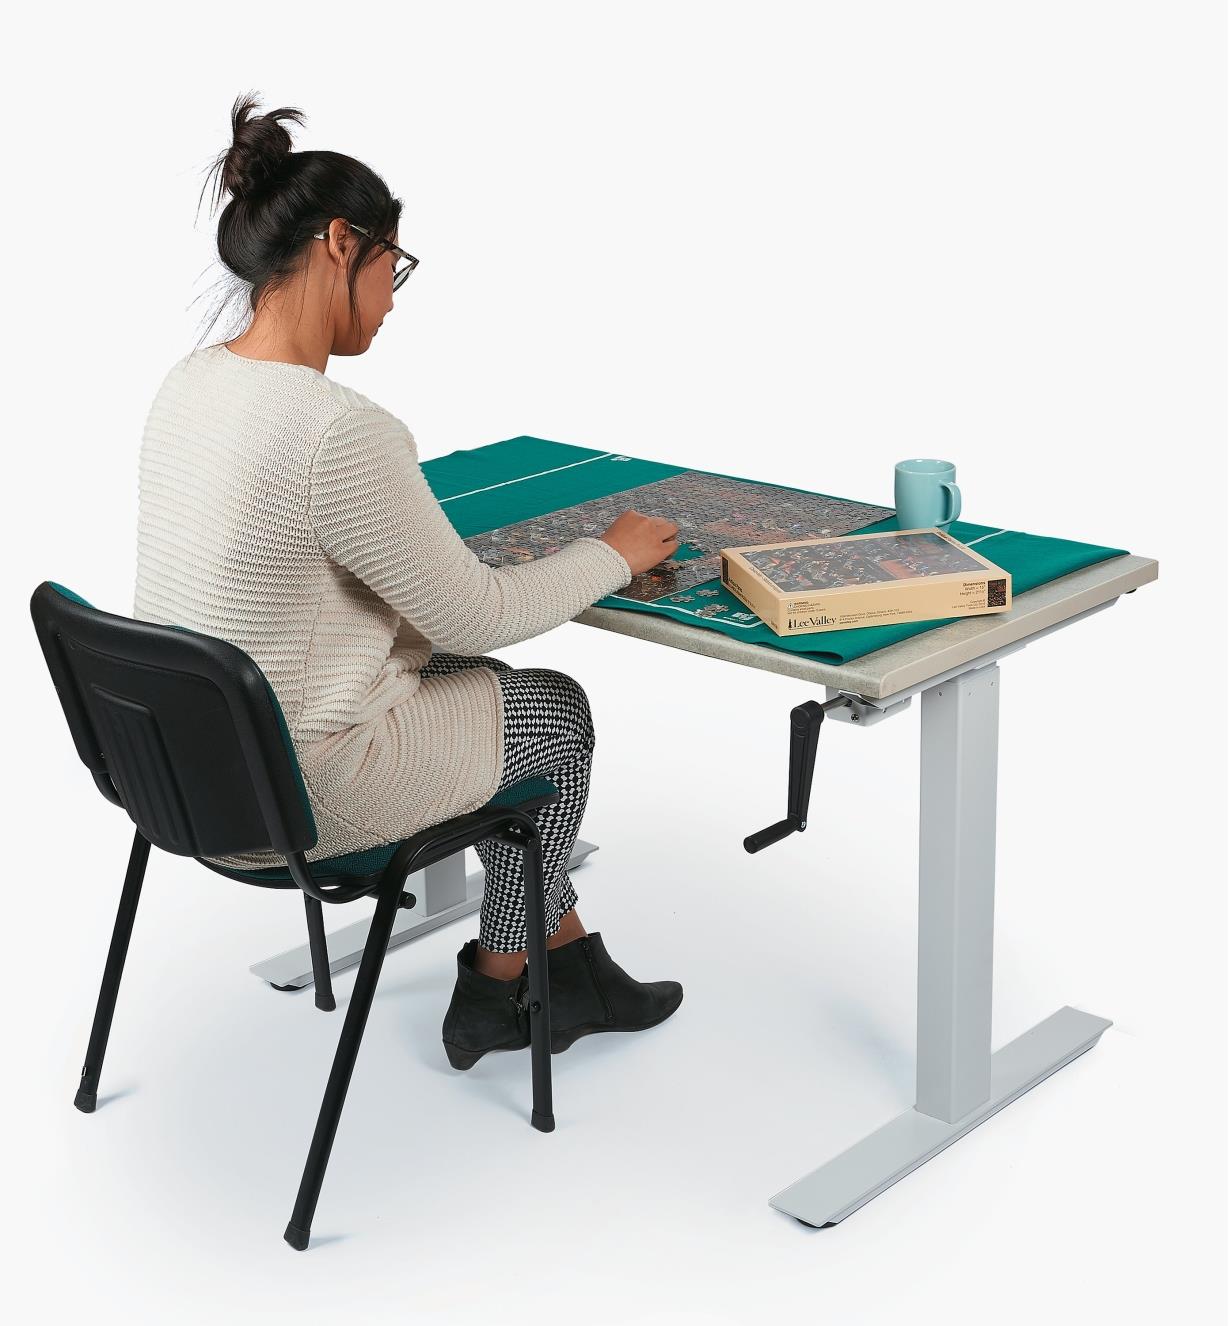 A woman sitting in a chair works on a jigsaw puzzle at a table made with the Manual Table Lift Kit